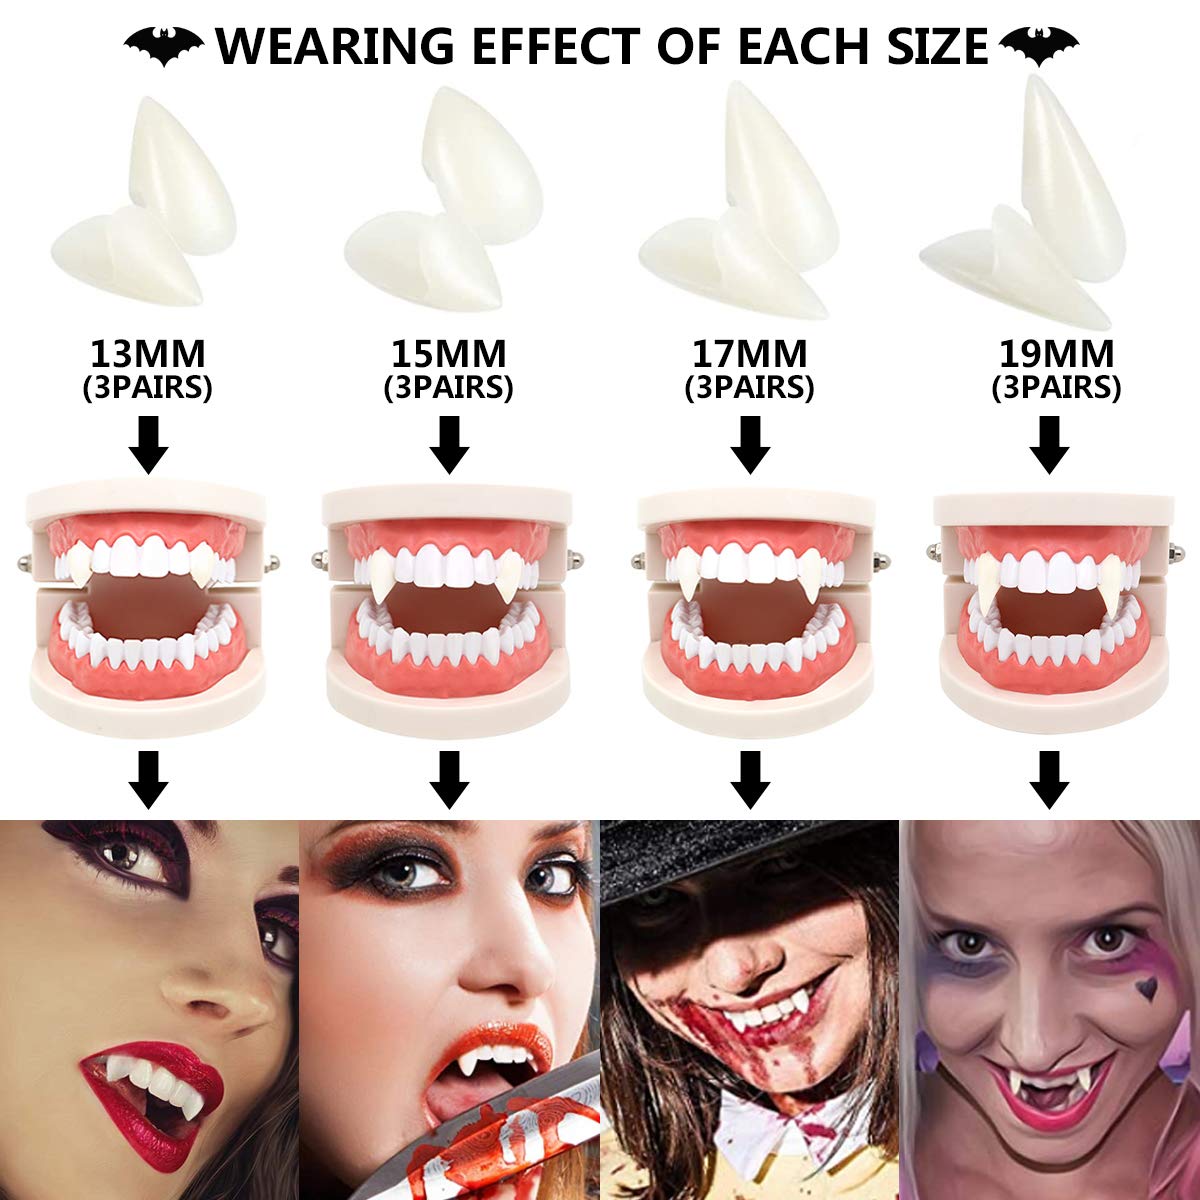 Nobie vivid 12 Pairs Vampire Teeth with Adhesive, Halloween Decorations Vampire Fangs, Halloween Party Cosplay Props,4 Size(13mm,15mm,17mm,19mm)